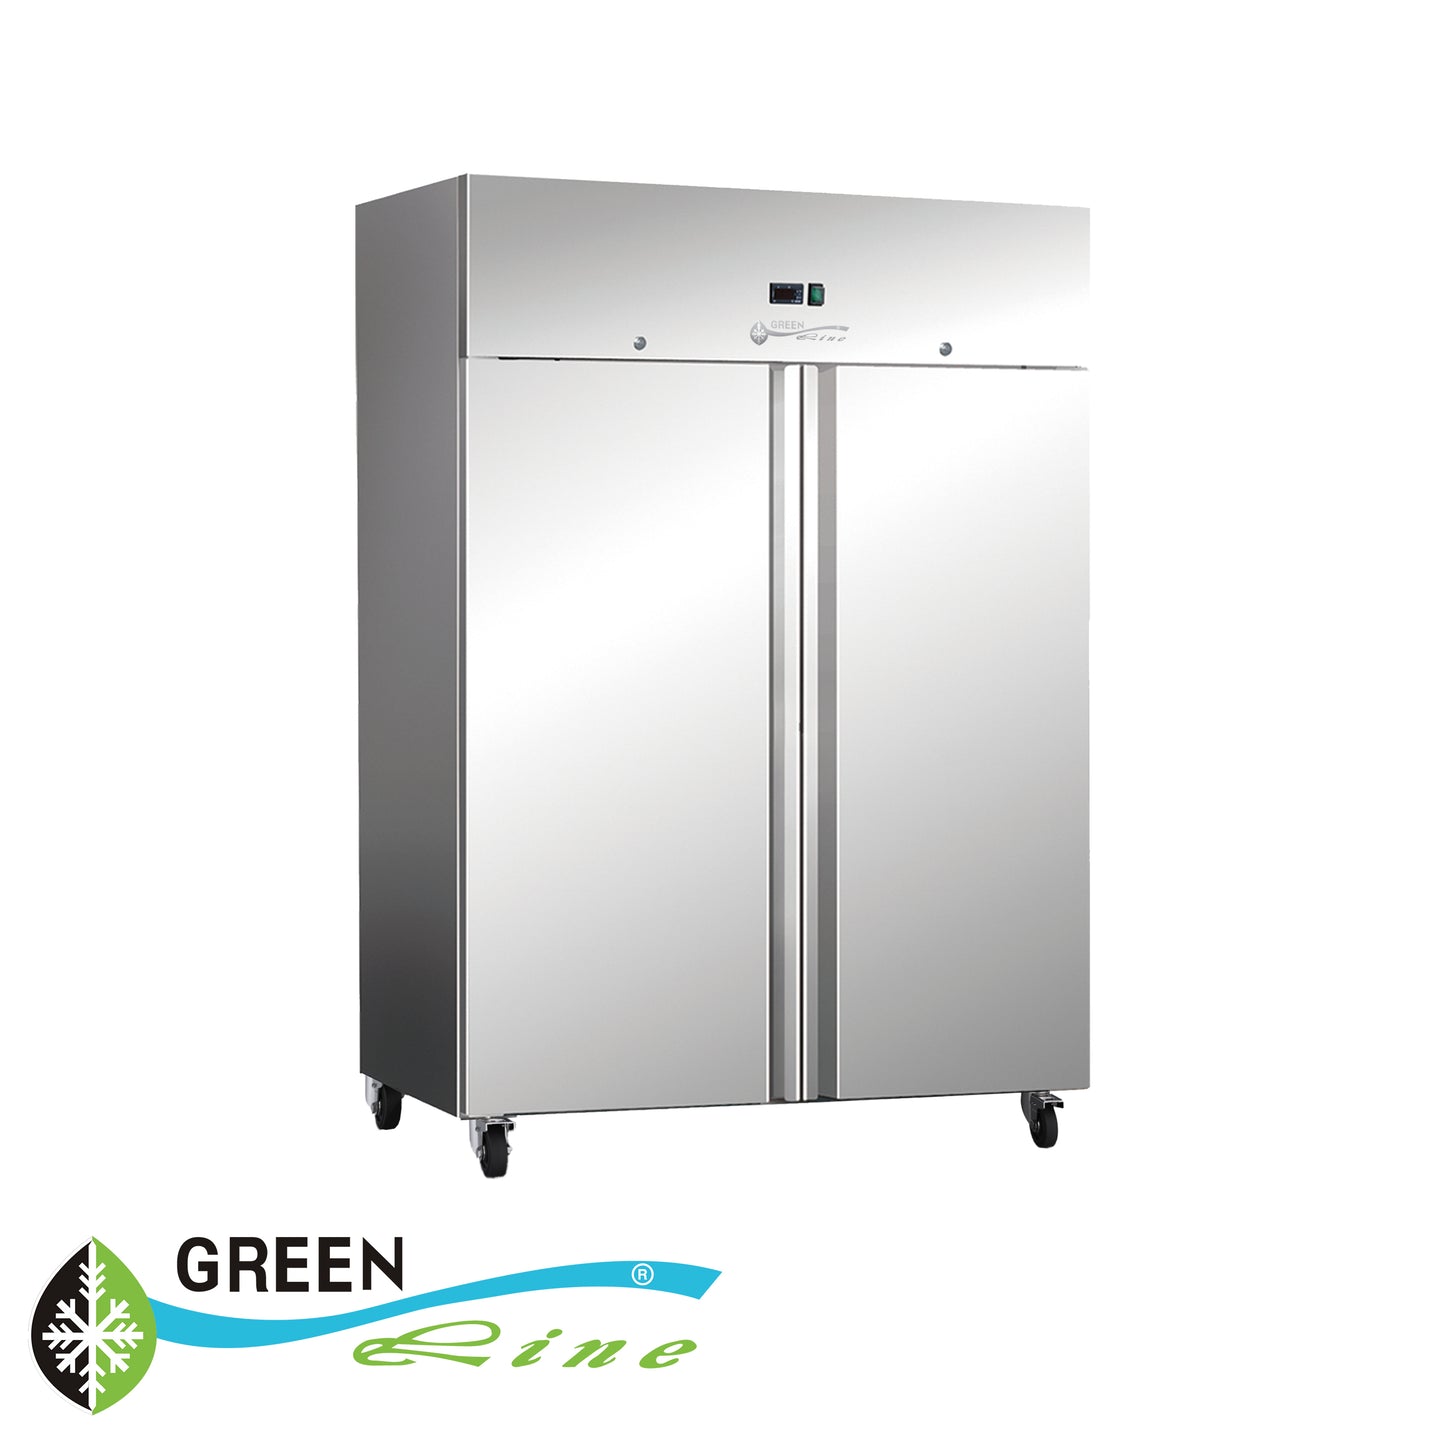 GLKF2S-1300 TWO DOOR STAINLESS FREEZER 1300 LITRES CAPACITY